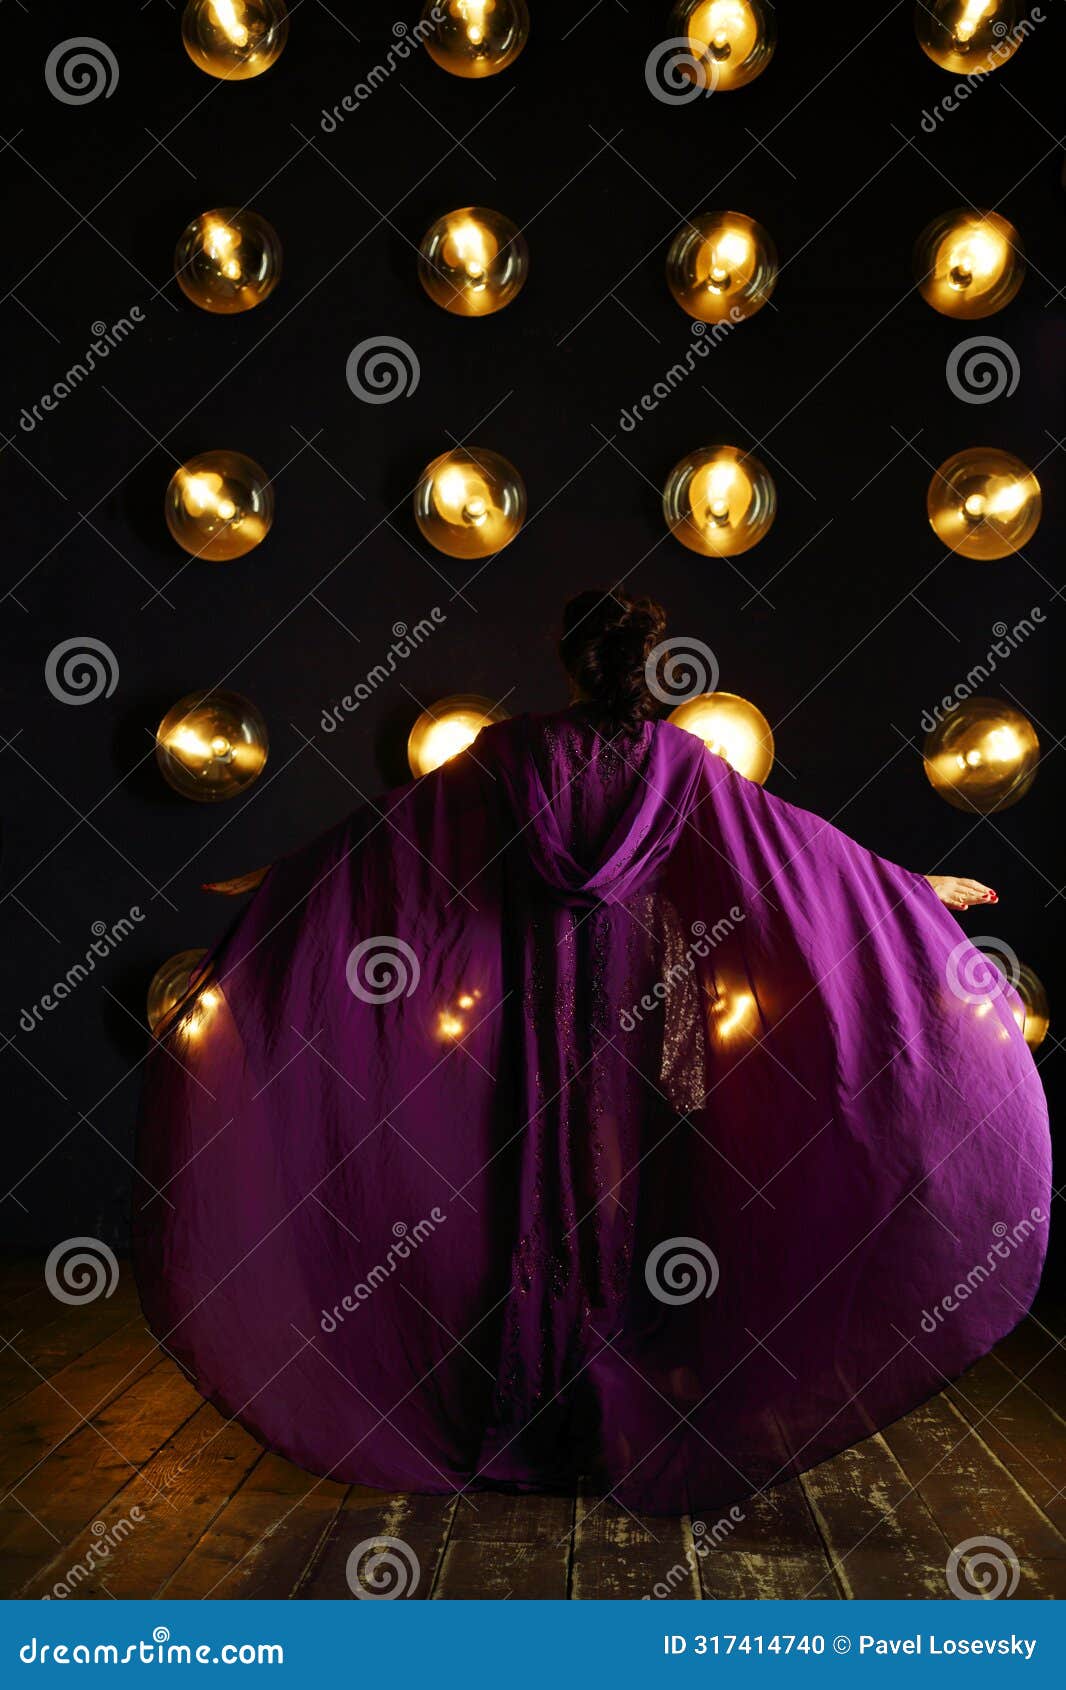 girl in purple mantle poses near wall with lamps